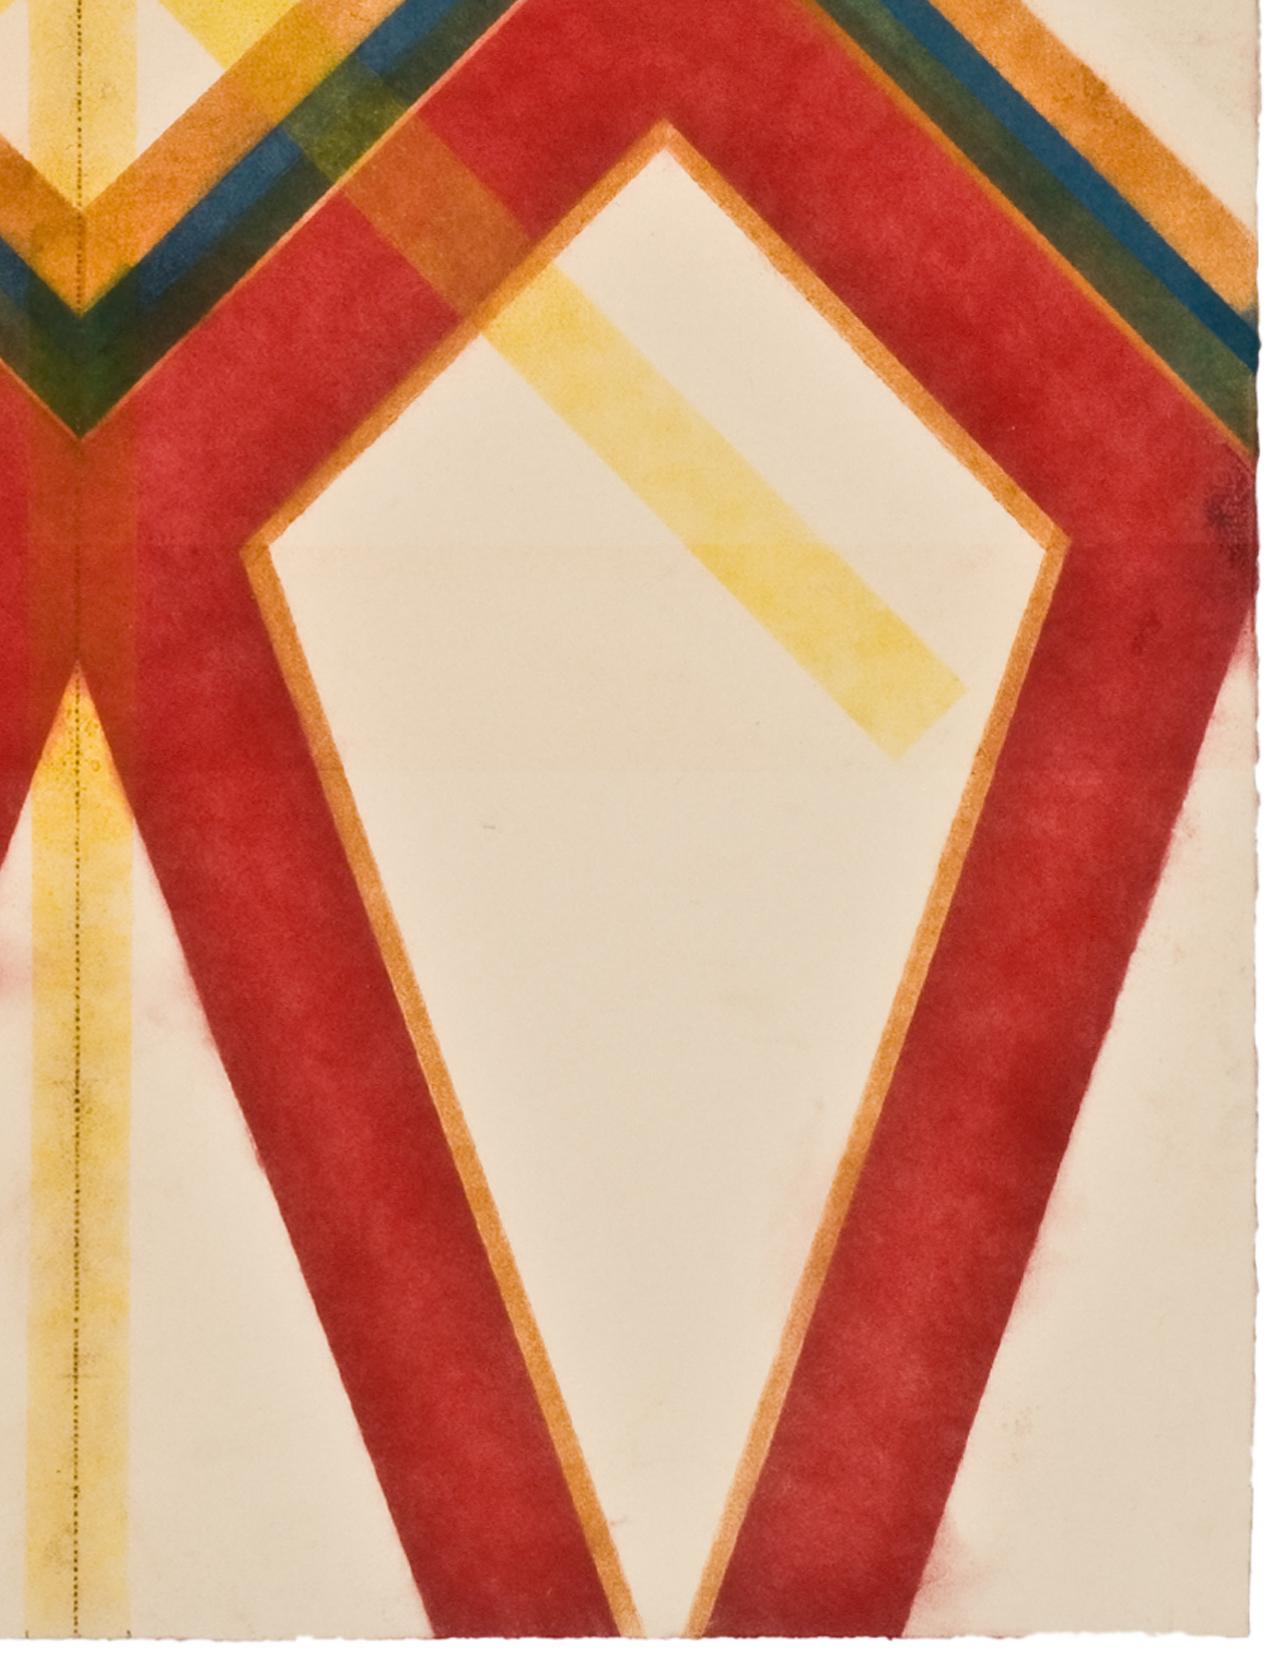 This geometric drawing has a beautiful, soft mottled texture created with Judge's unique powered pigment technique. The ordered symmetry of the layered diagonal lines in deeply pigmented bright red, light yellow, orange, dark blue and green is